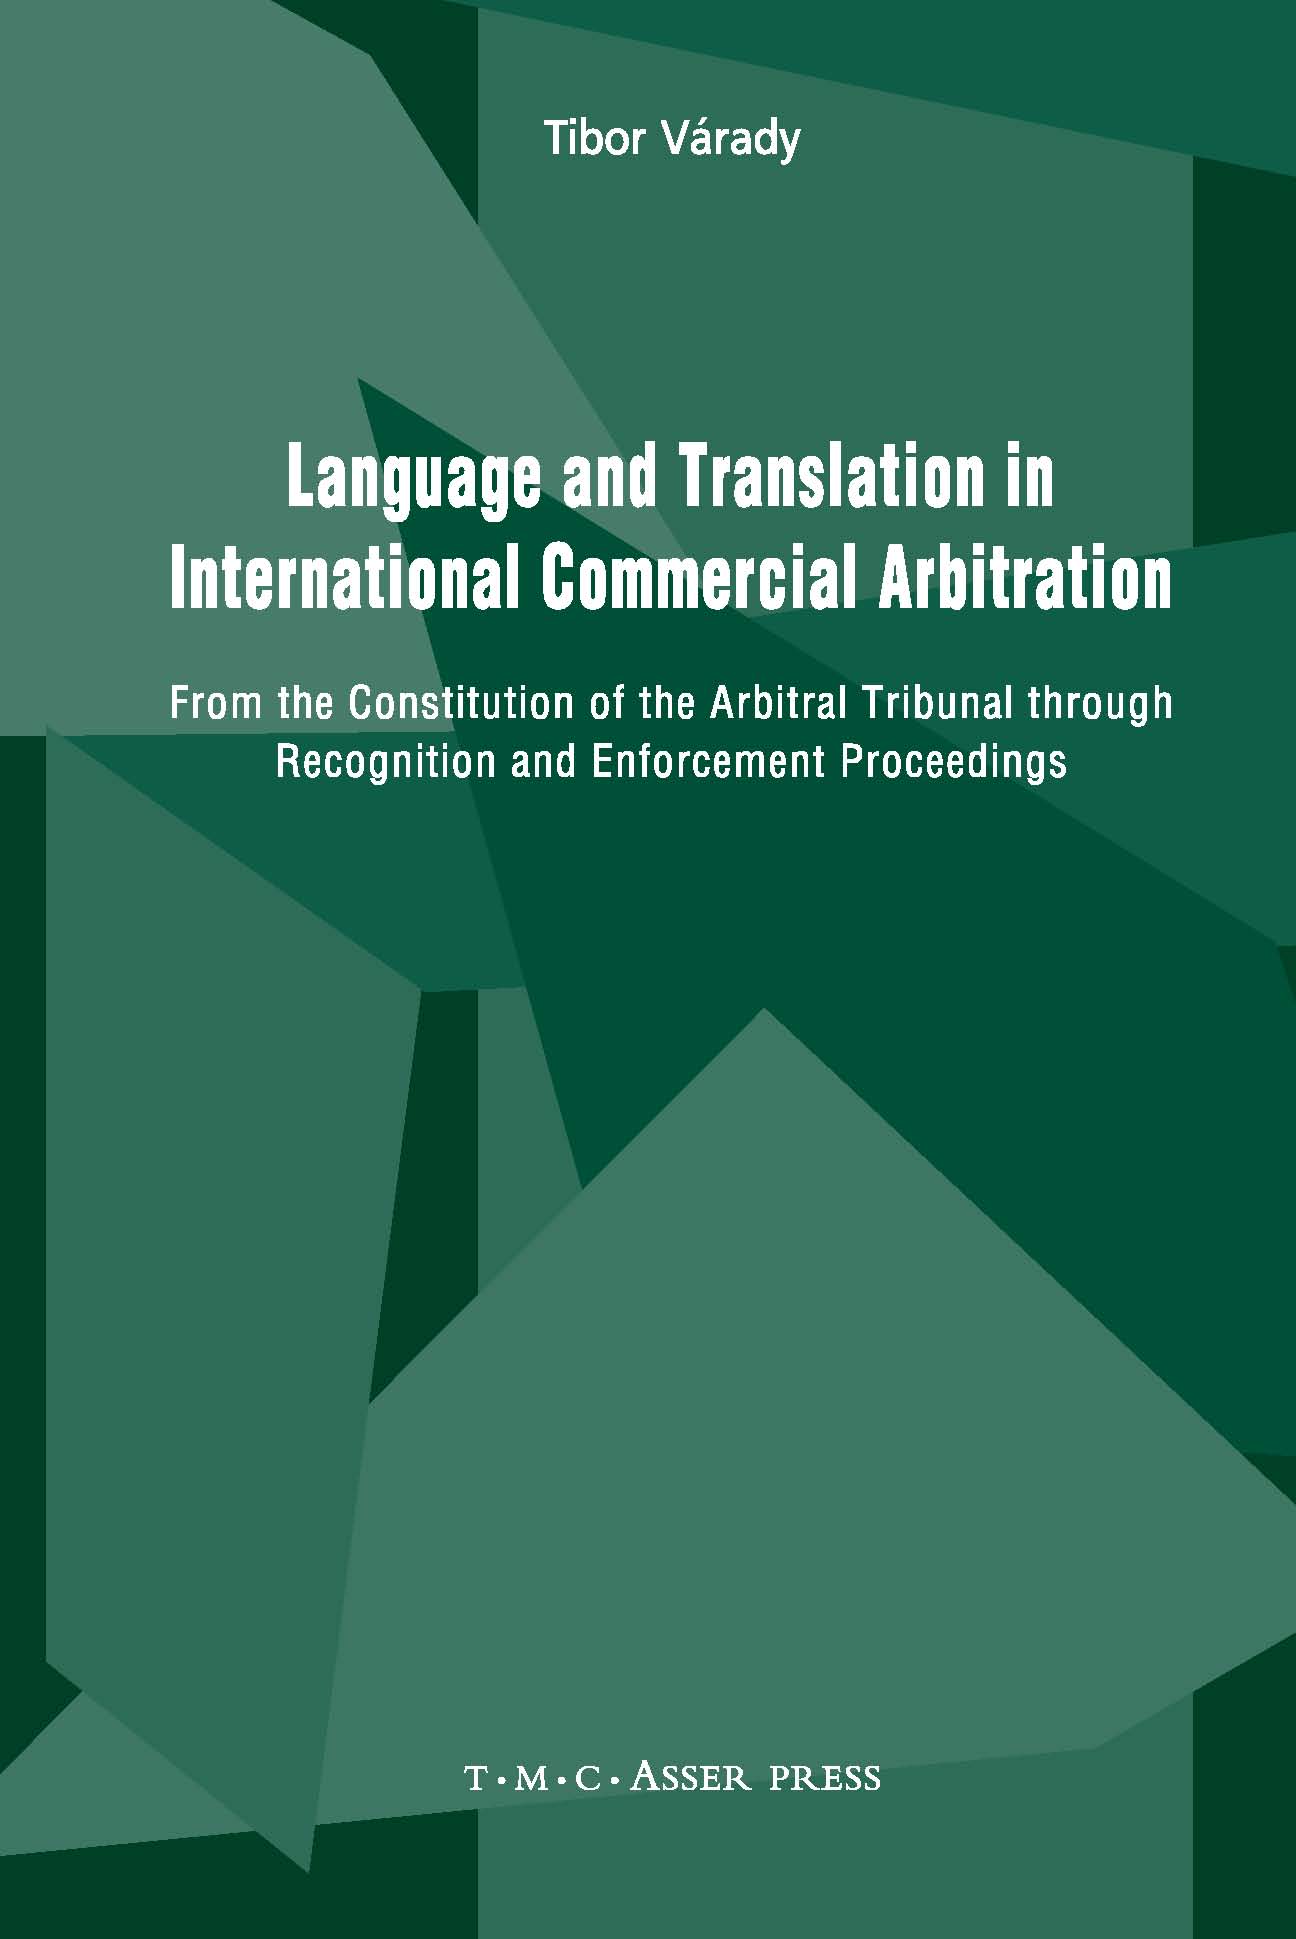 Language and Translation in International Commercial Arbitration - From the Constitution of the Arbitral Tribunal through Recognition and Enforcement Proceedings